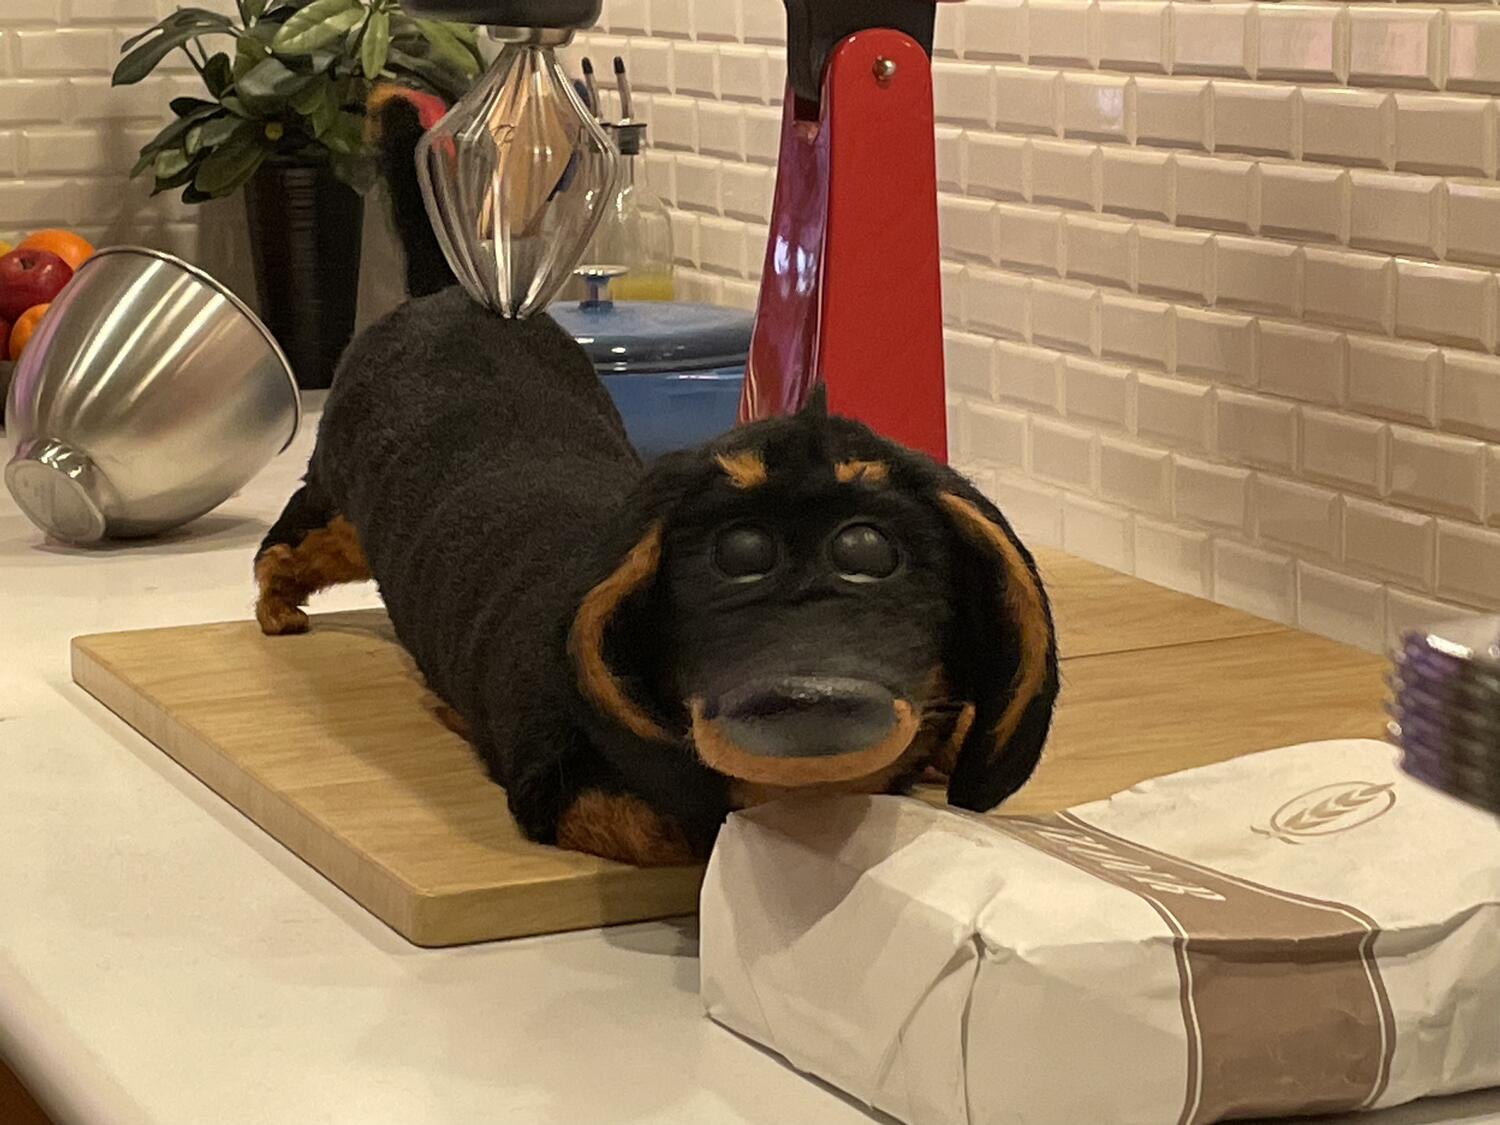 An animatronic dachsund getting a butt massage from a stand mixer, its eyes half-closed in ecstasy